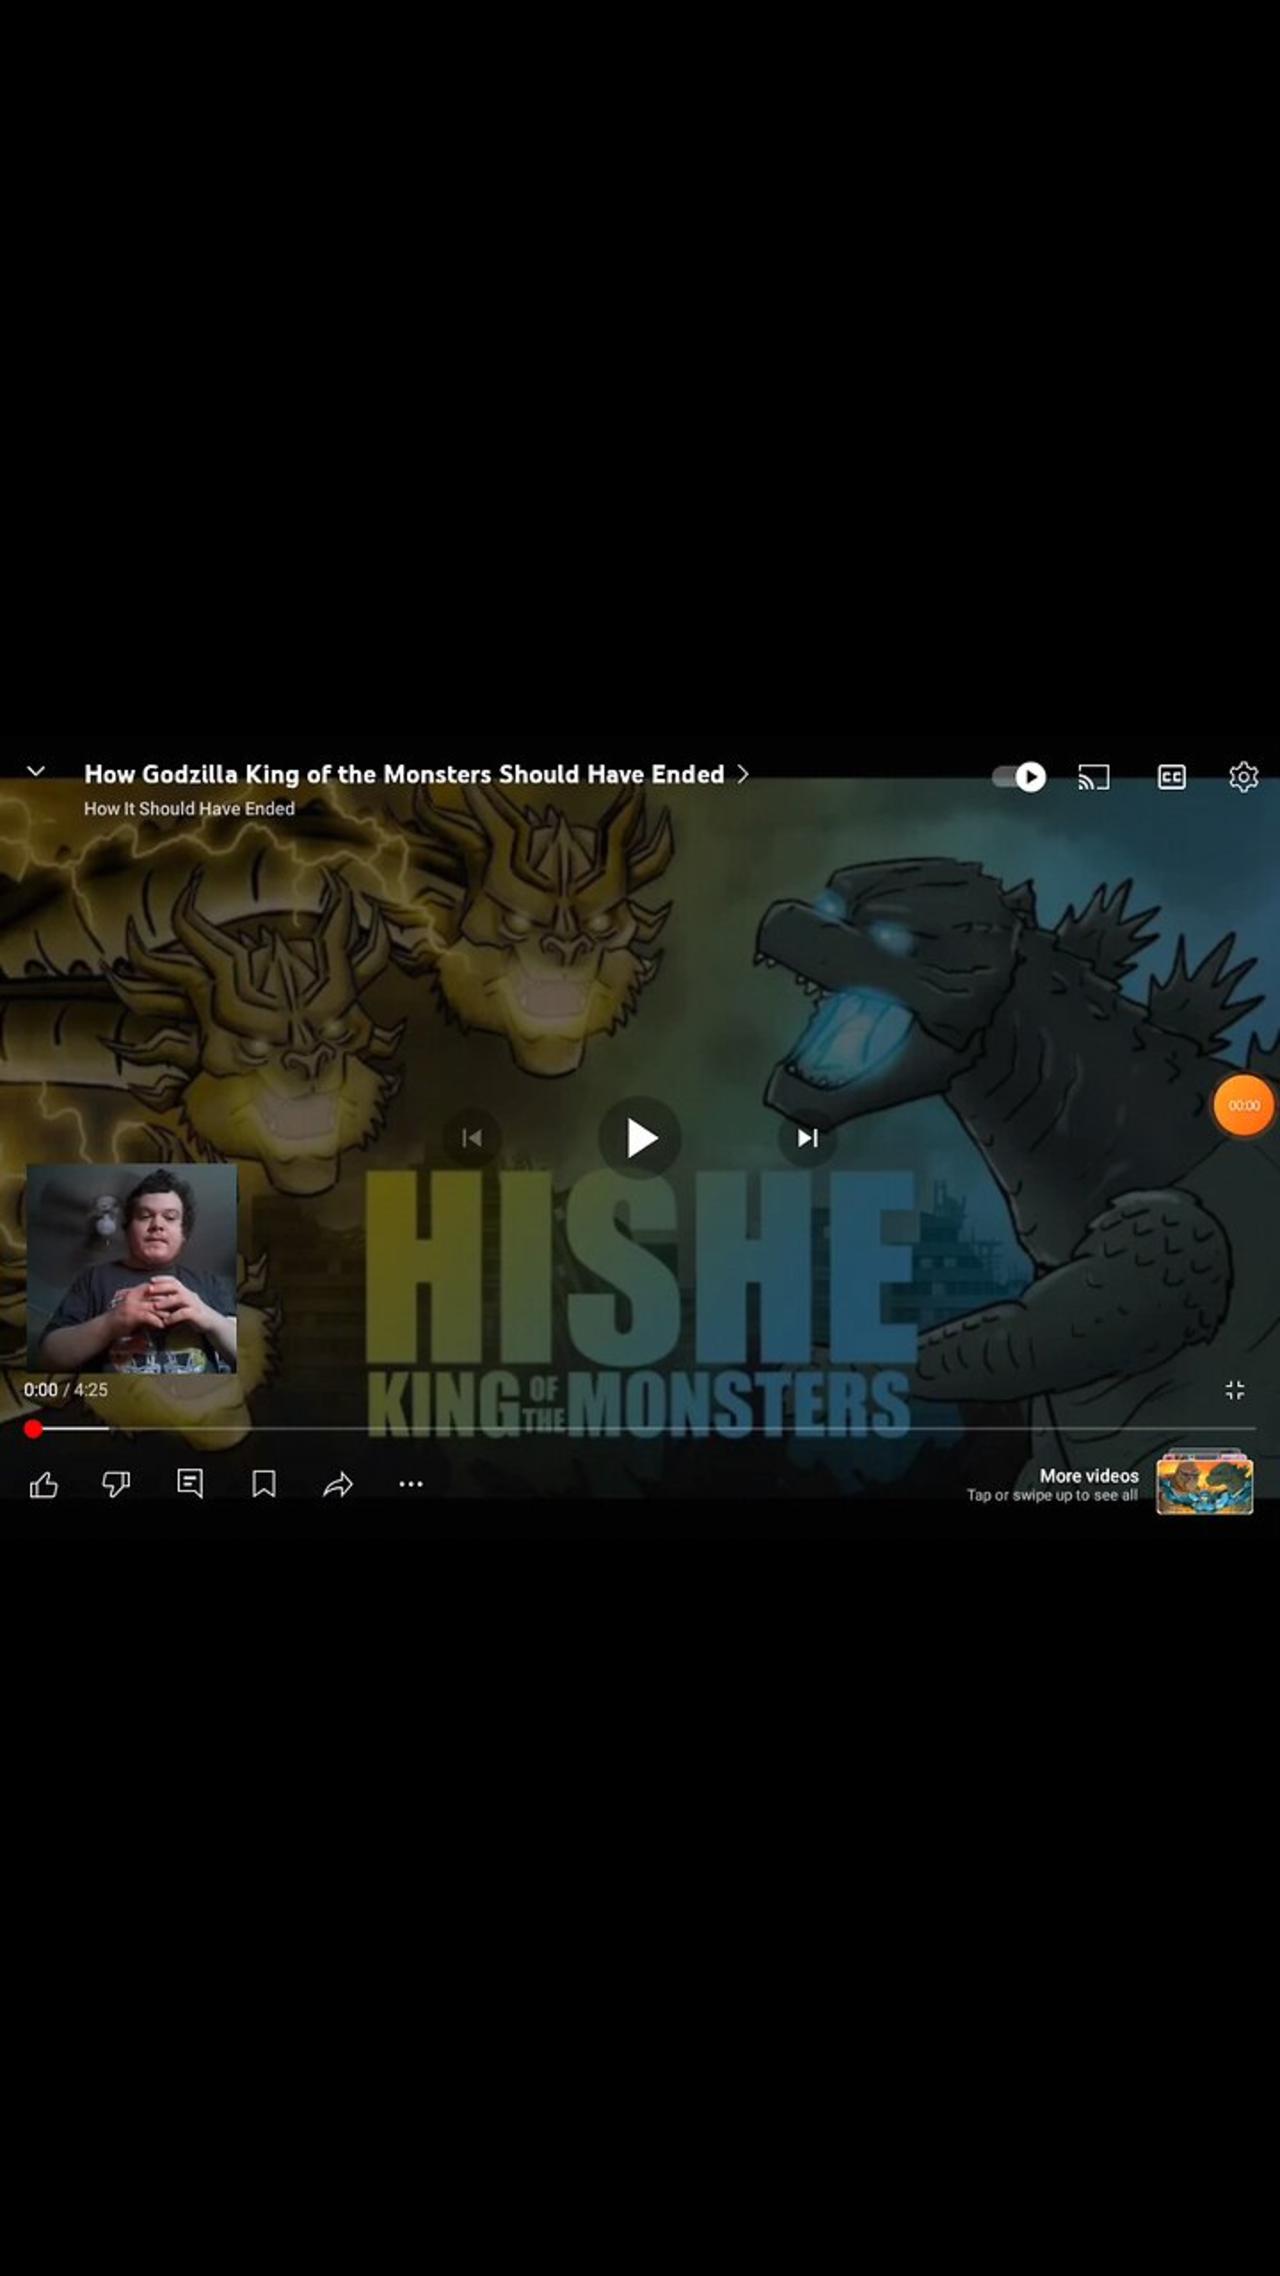 Reacting To How Godzilla King Of The Monsters Should Have Ended